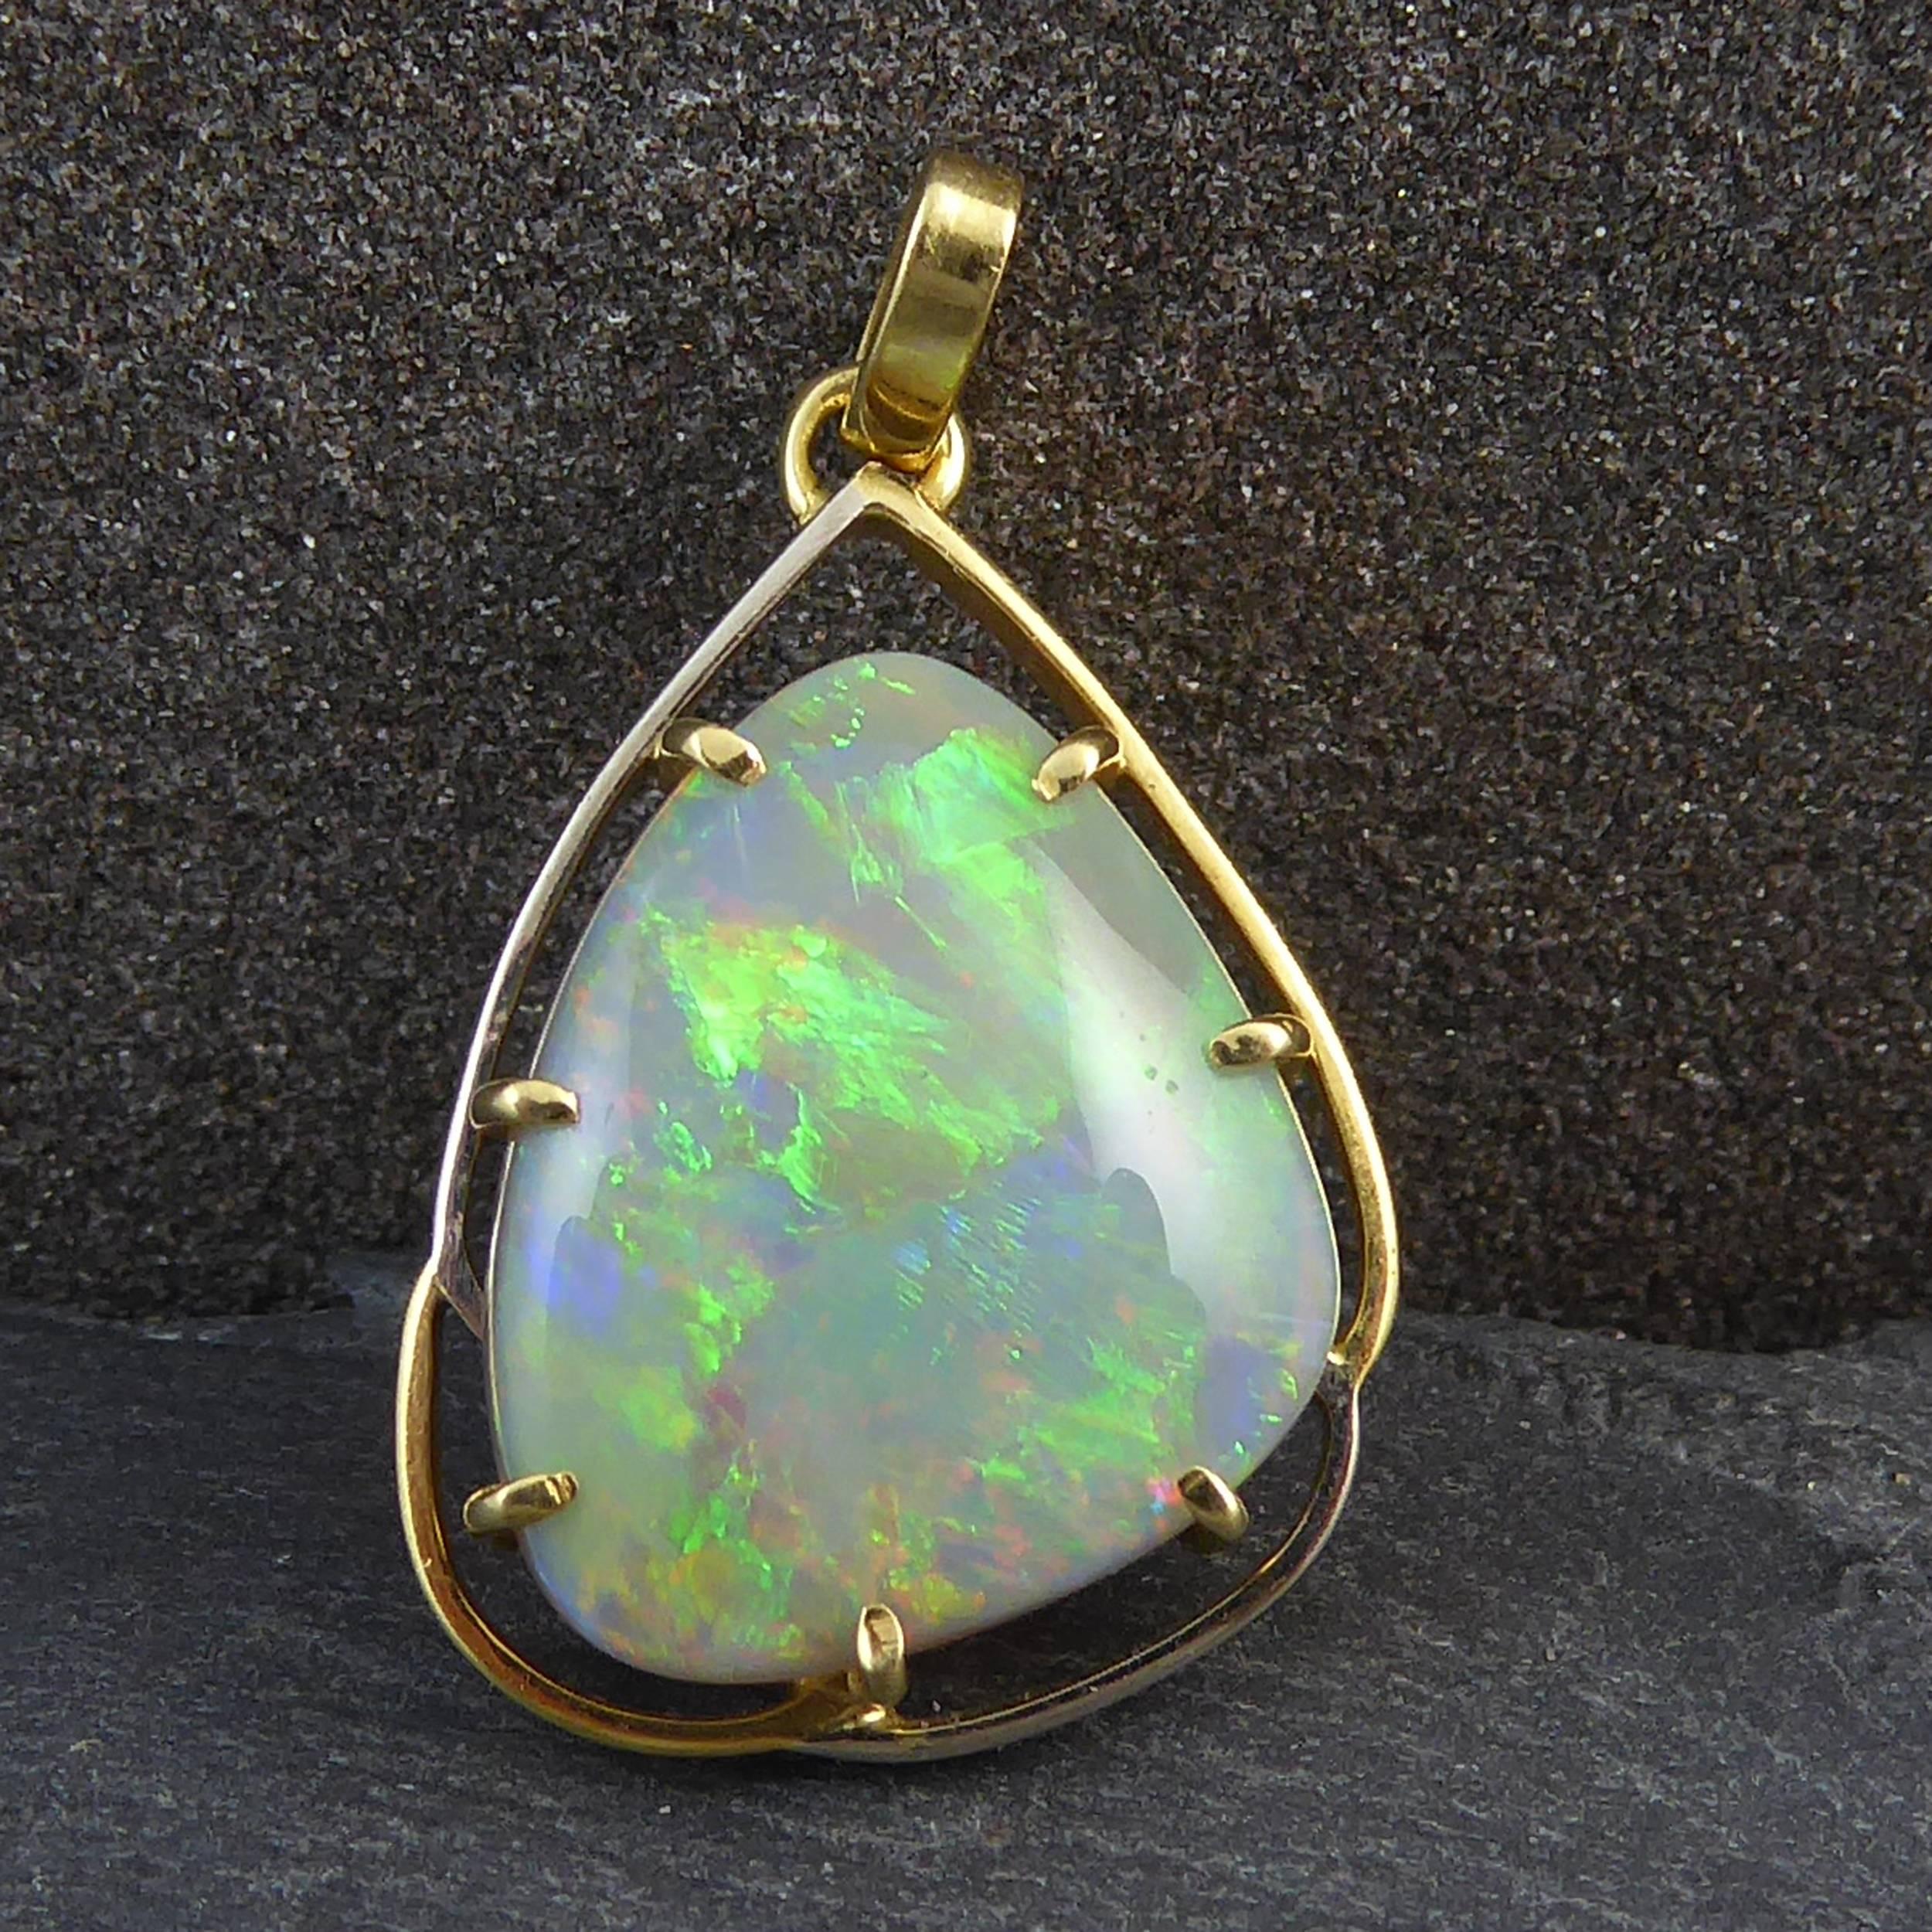 An opal set pendant comprising a spectacularly coloured opal cut in a free form, triangular cabochon shape.  The opal has a white base colour with strong green and minor orange and indigo play of colour.  Measuring approx. 0.75 x 0.56 x 0.18 inch